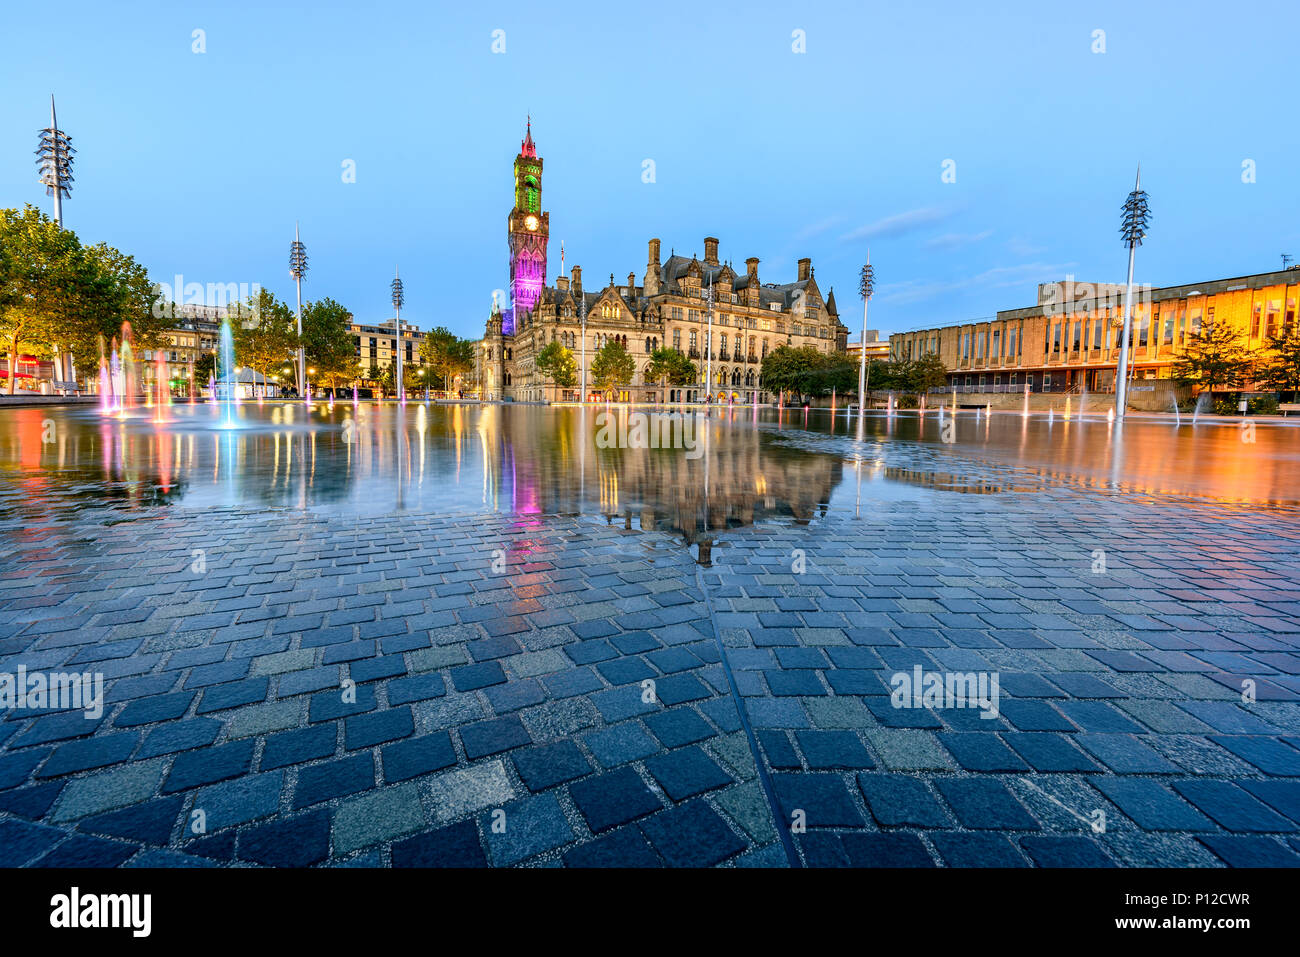 Vast mirror pool splashed by 107 fountains now glistens beside the Victorian city hall, Bradford, UK Stock Photo